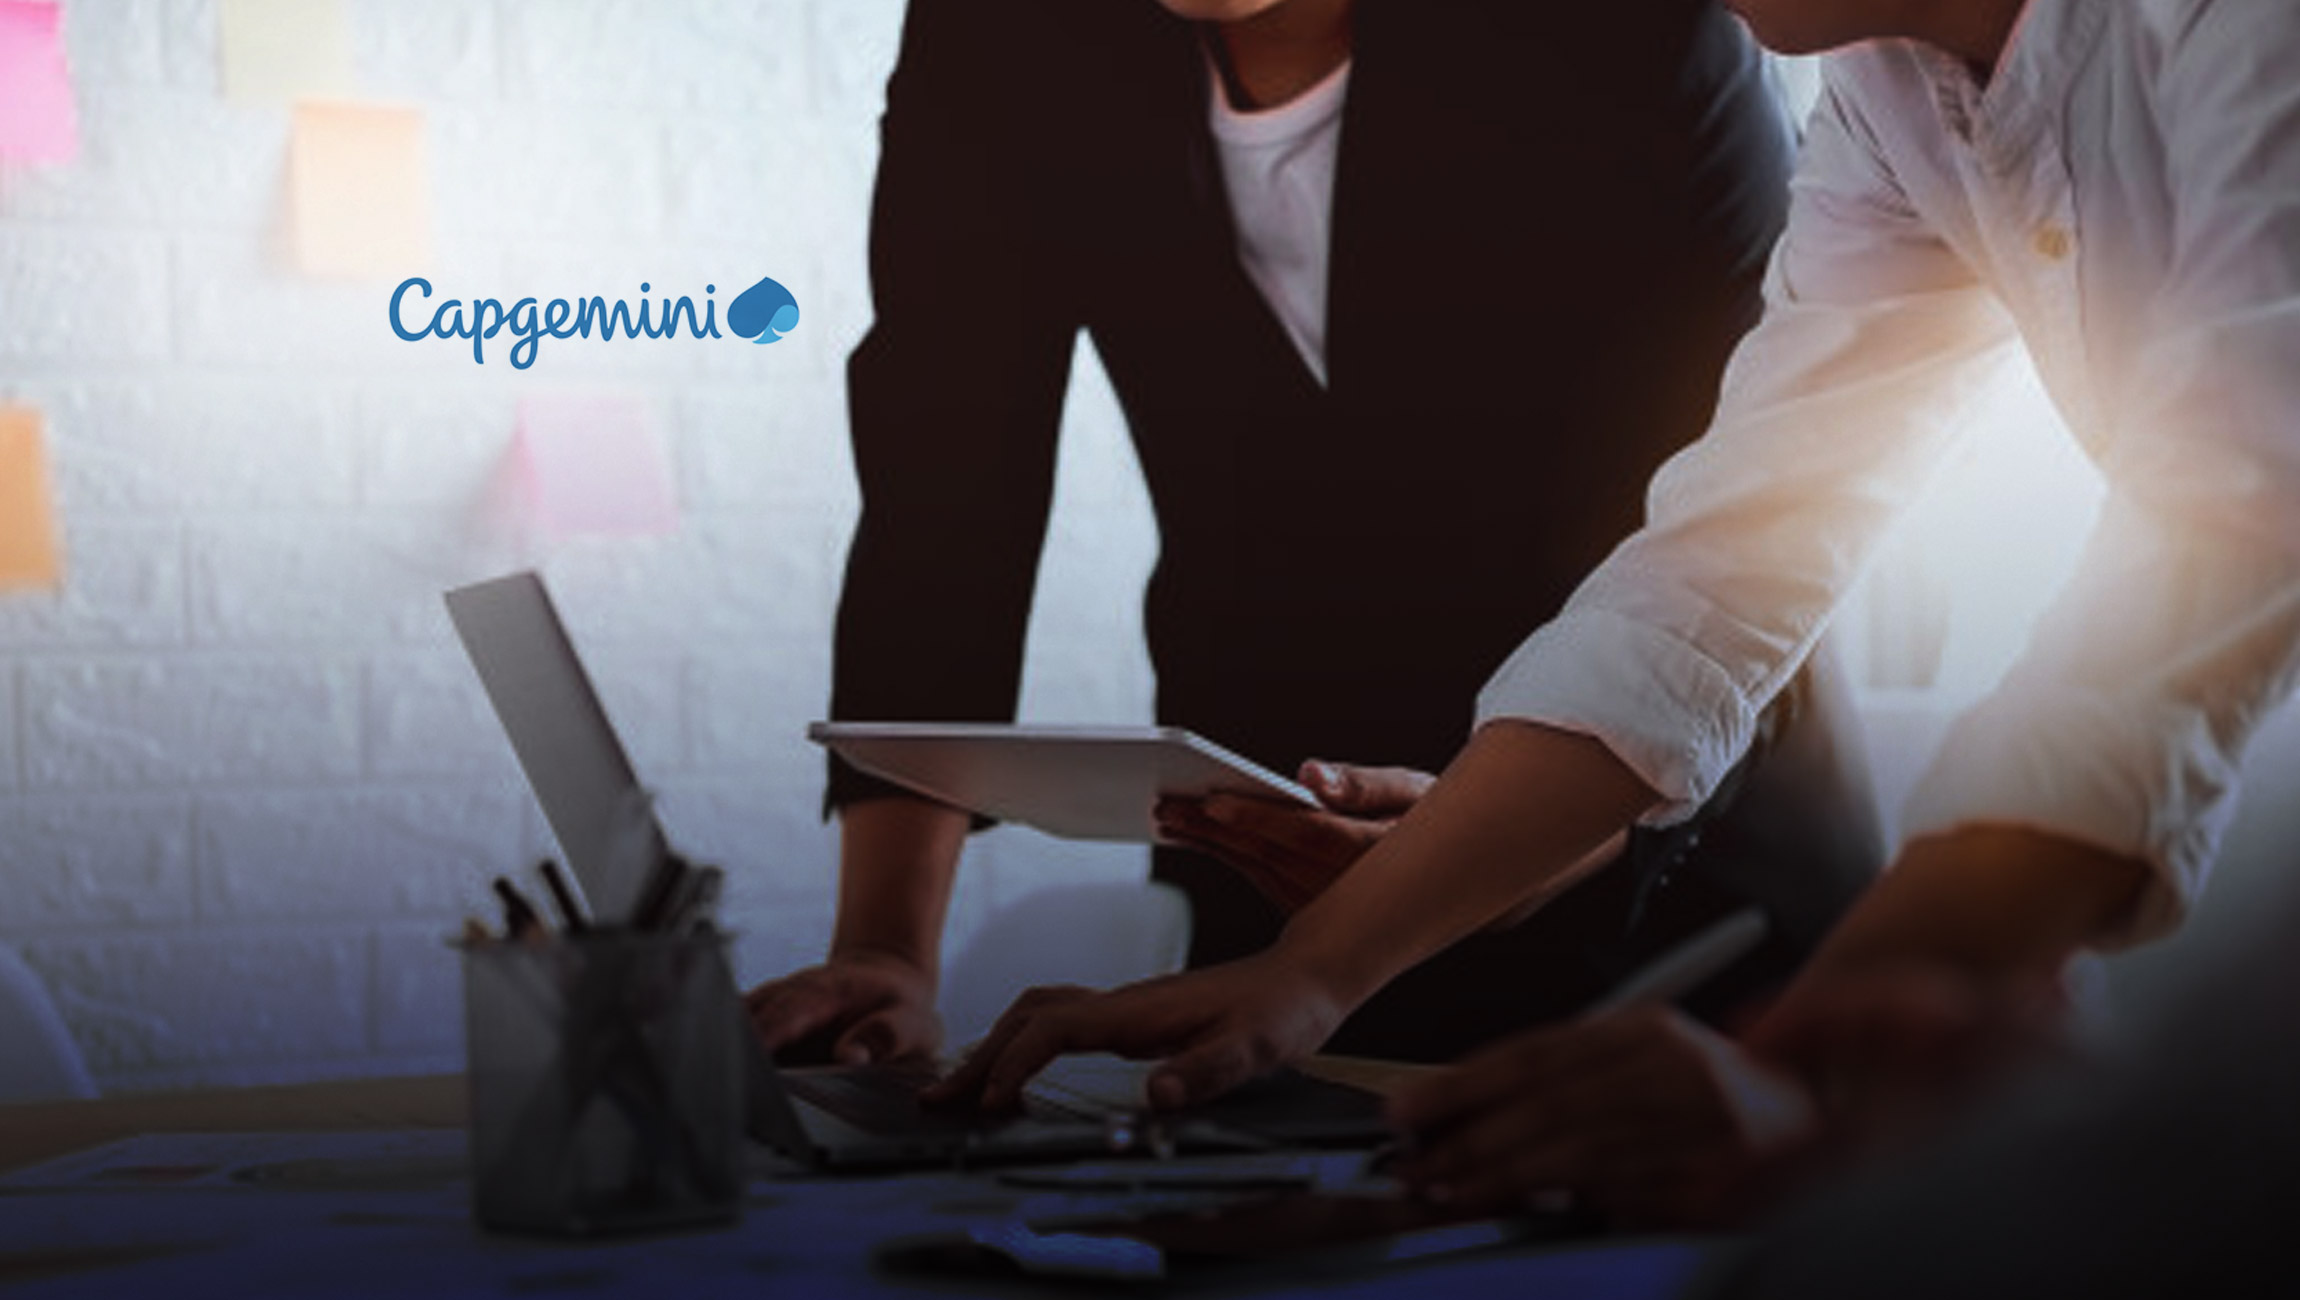 Capgemini announces appointment of Olivier Sevillia as Group Chief Operating Officer